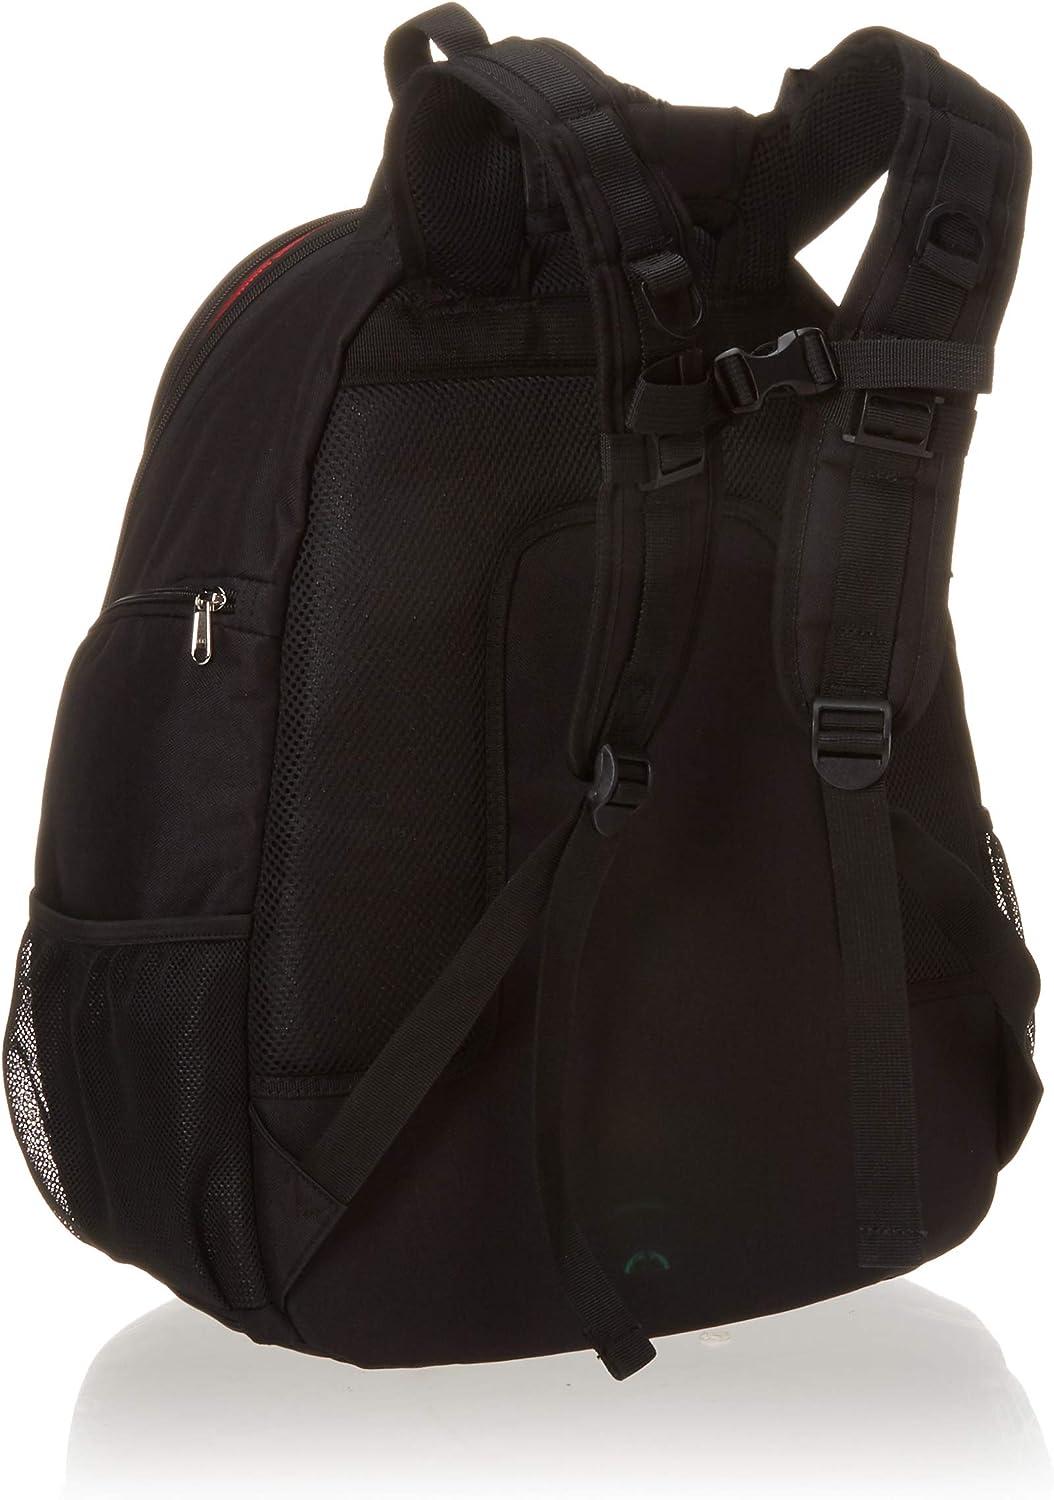 Moxy Duo Backpack Bowling Bag- Black/Red